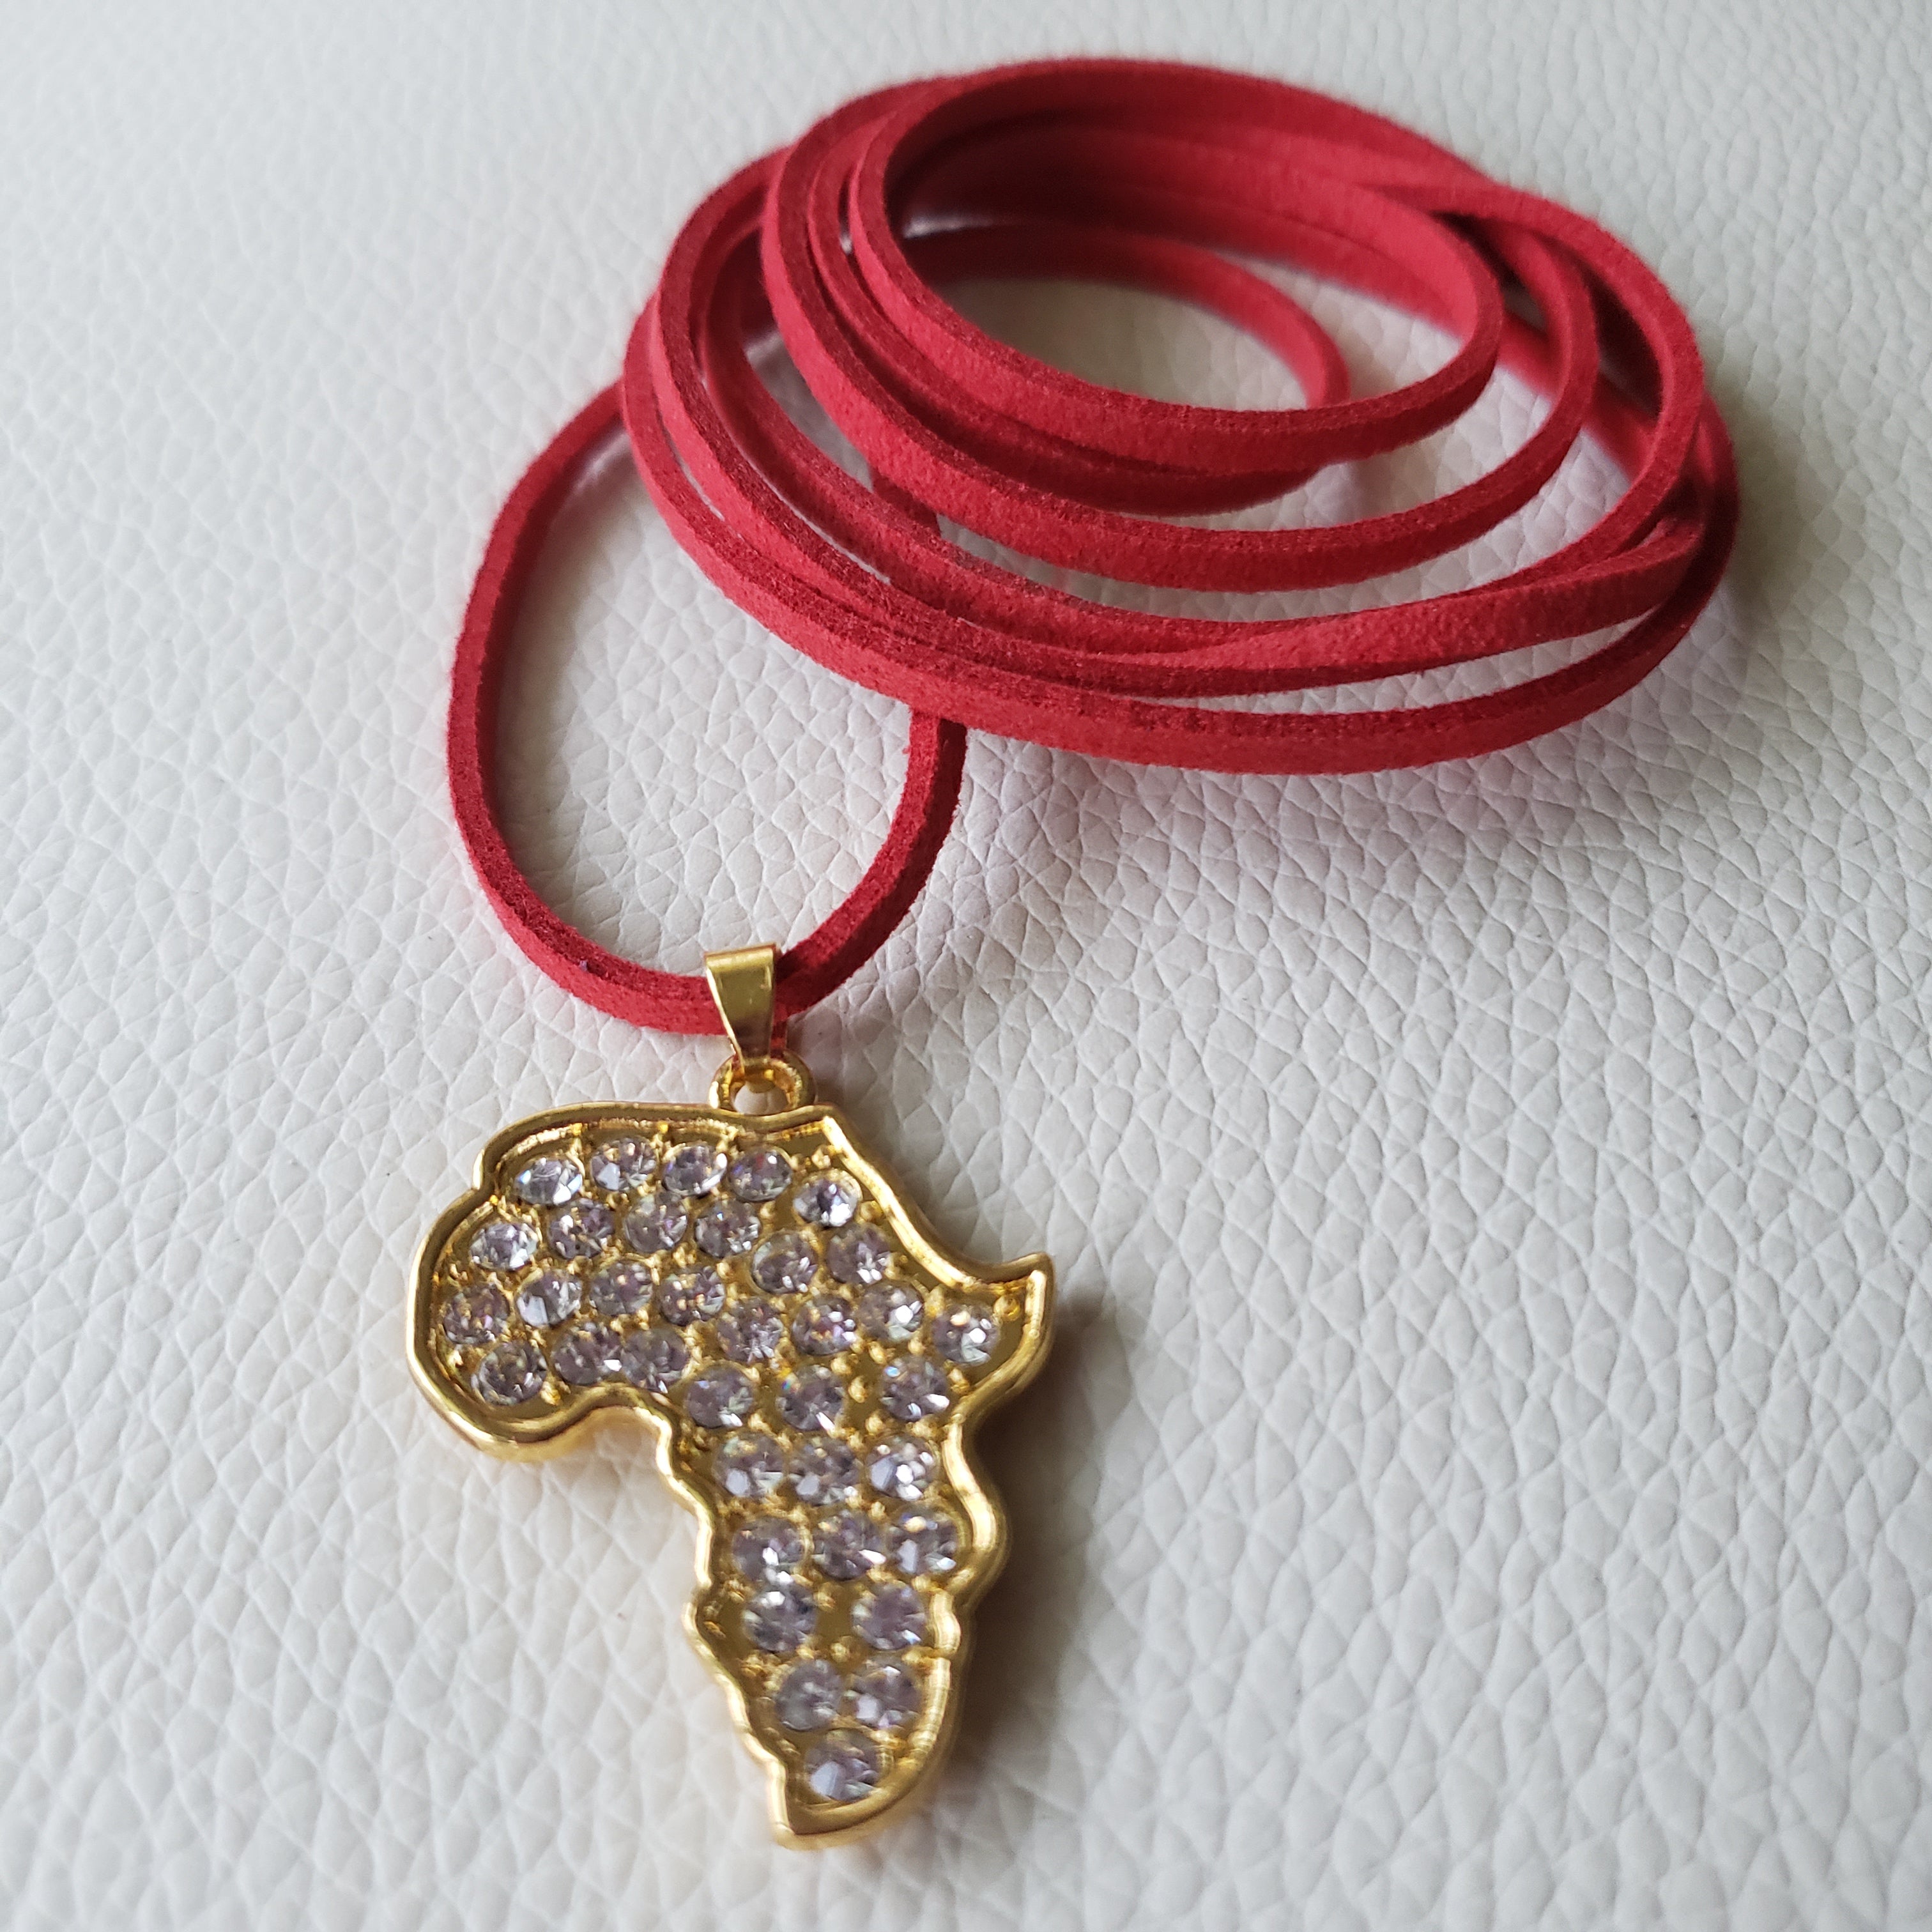 18K Gold Plated Africa Map Necklace, Afrobeats Collection